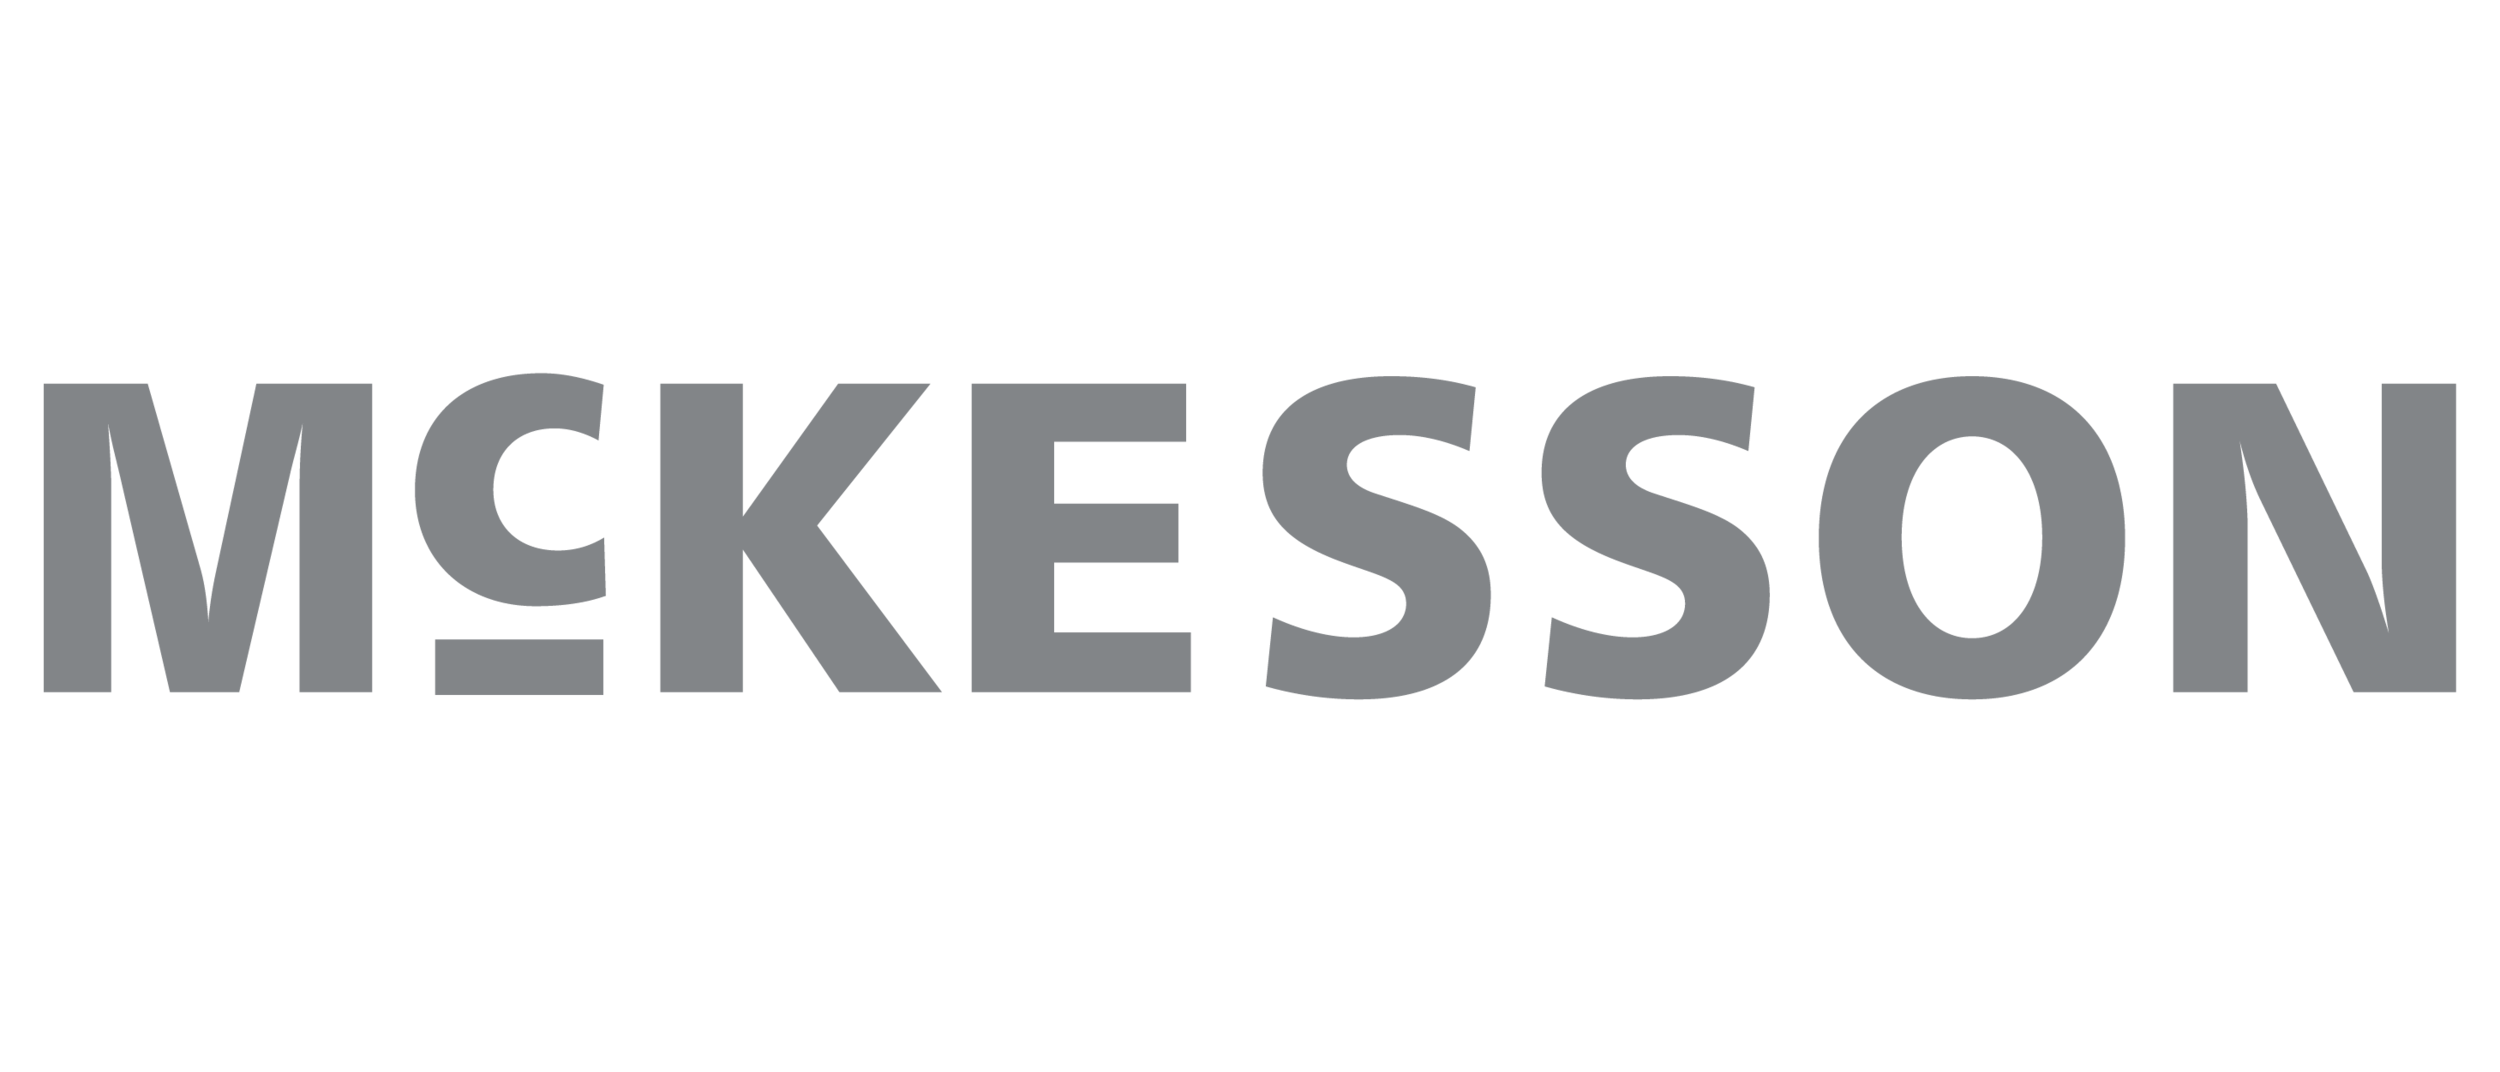 hard yards client logos_mckesson.png